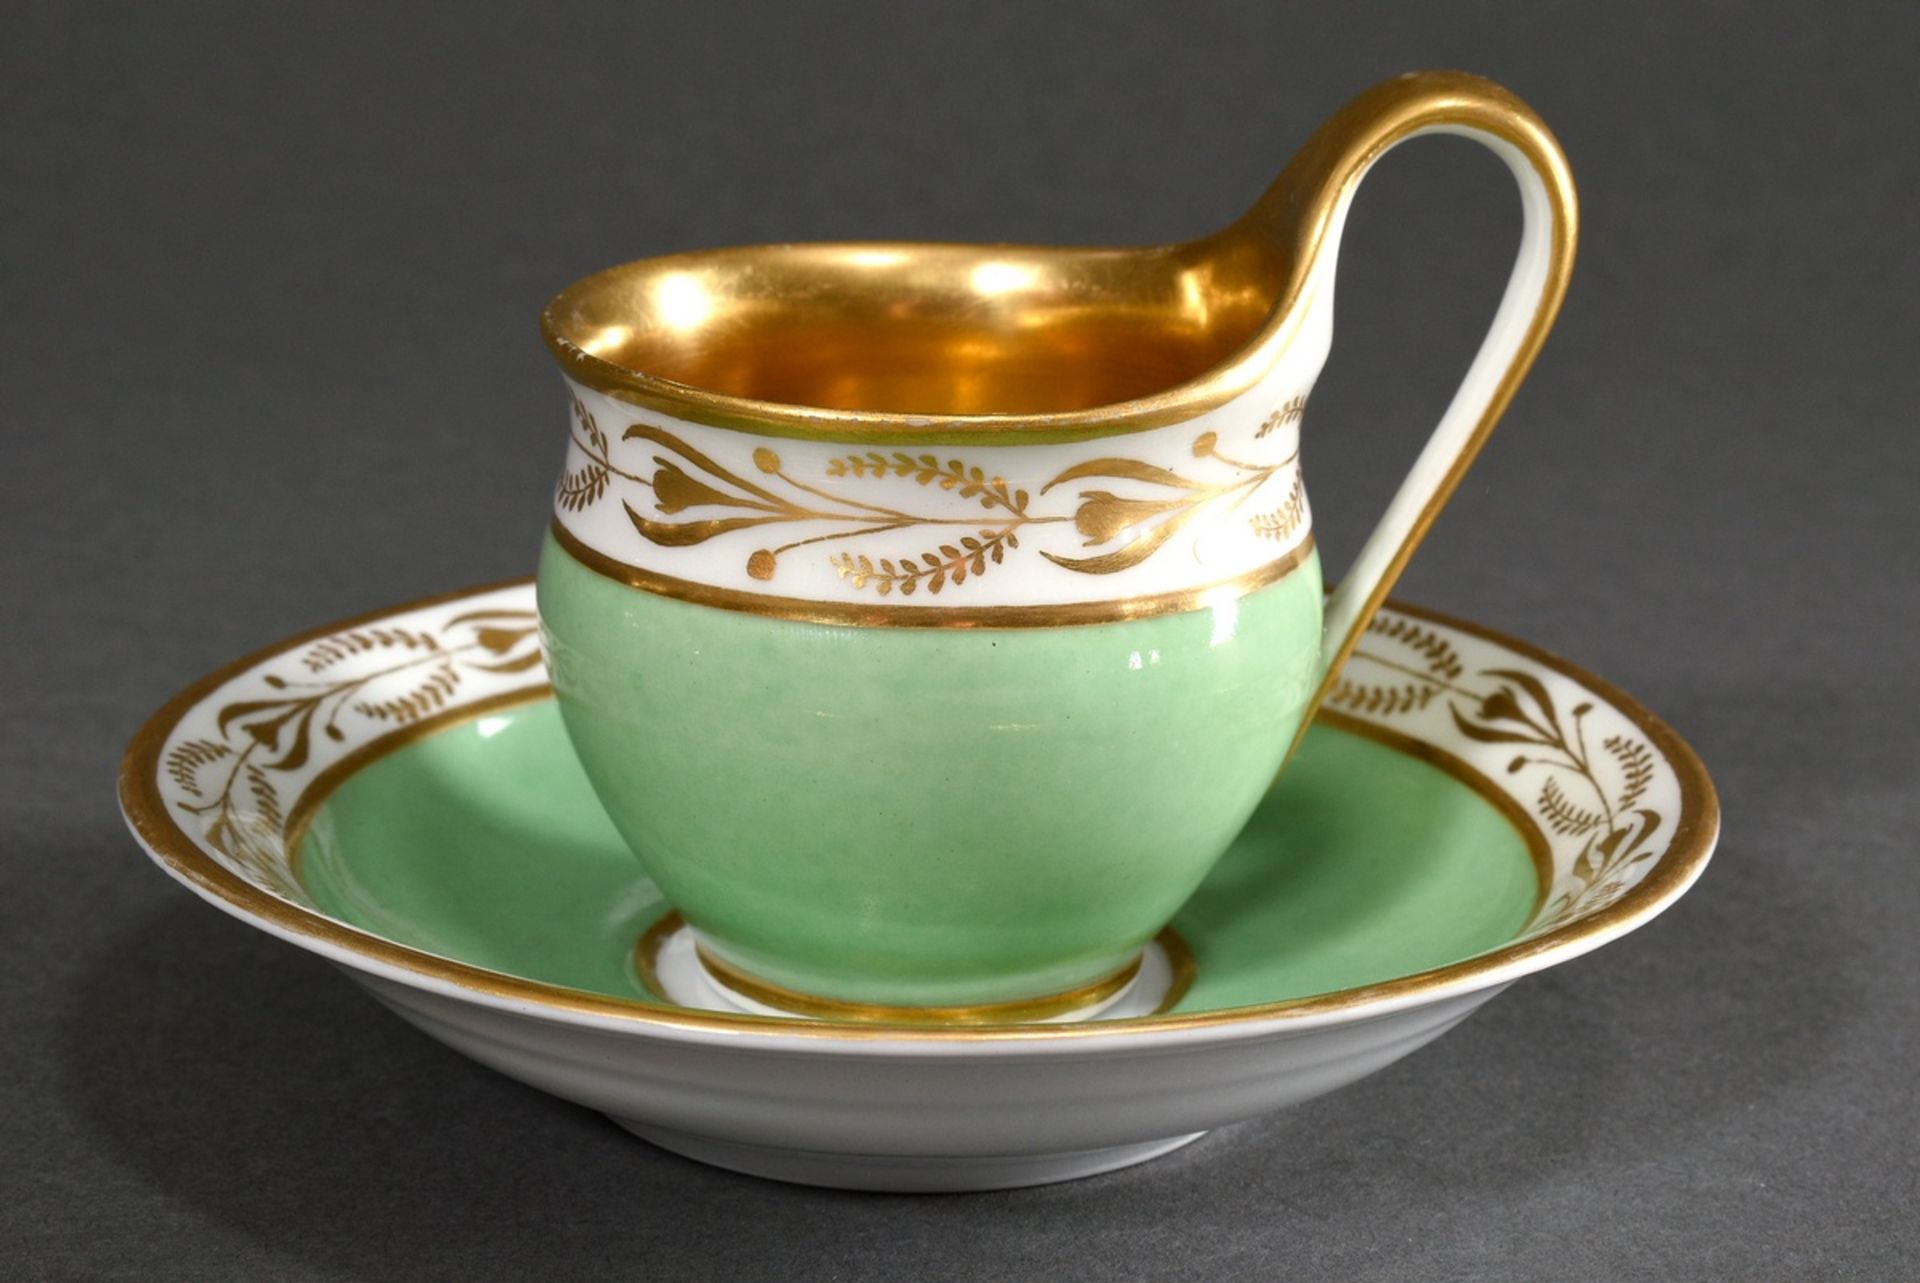 KPM Cup with floral gold friezes on a light green ground, Etrurian form with Campanian handle on ma - Image 2 of 3